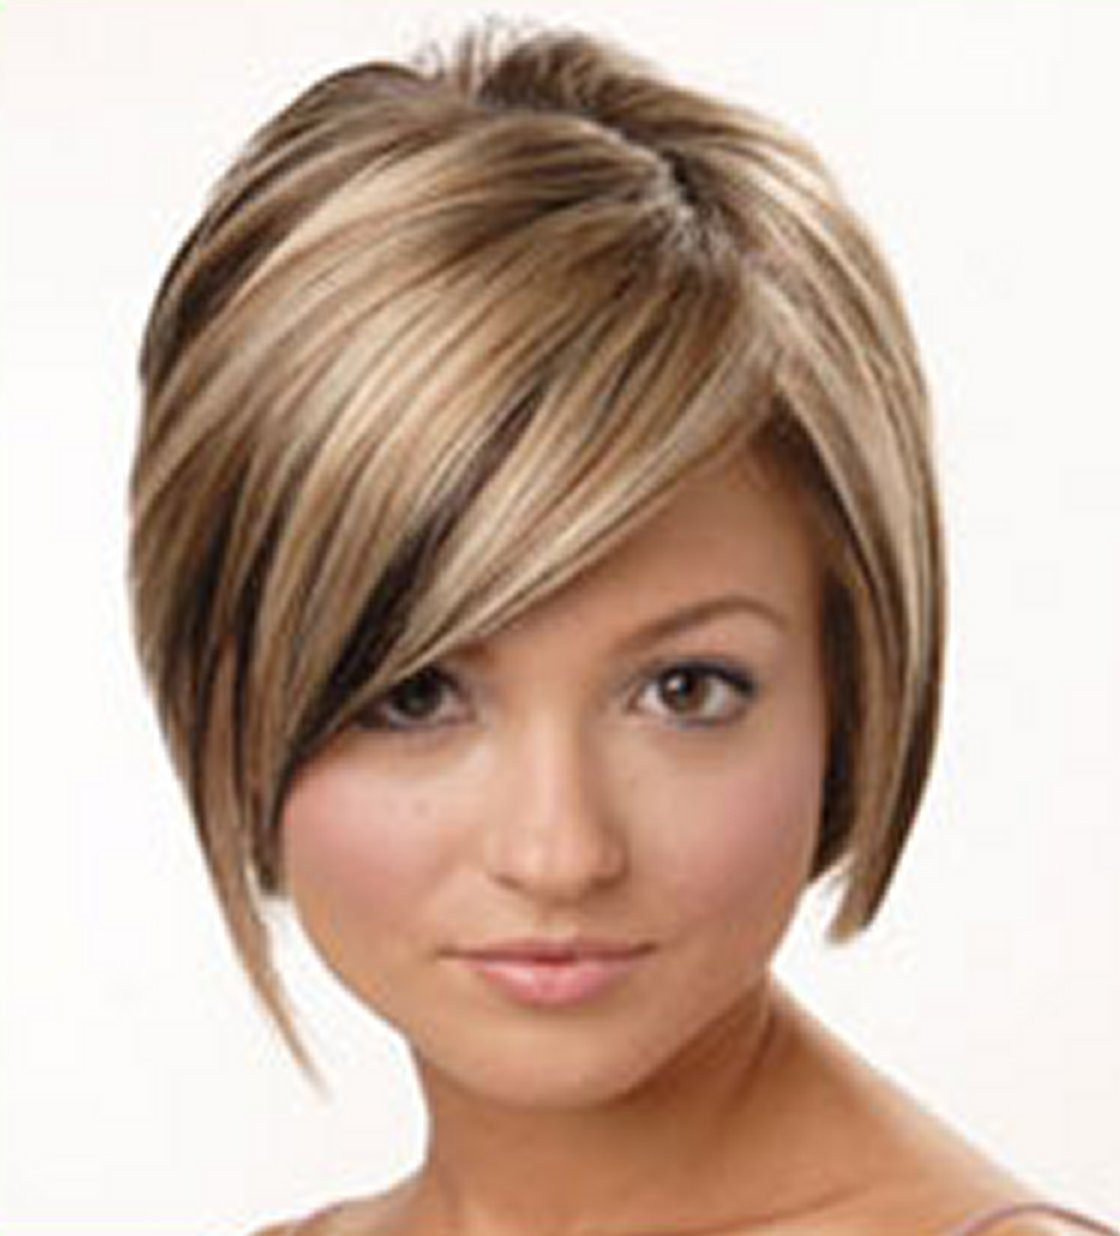 Pictures Of Girls Haircuts
 Best Short Hairstyles for Girls